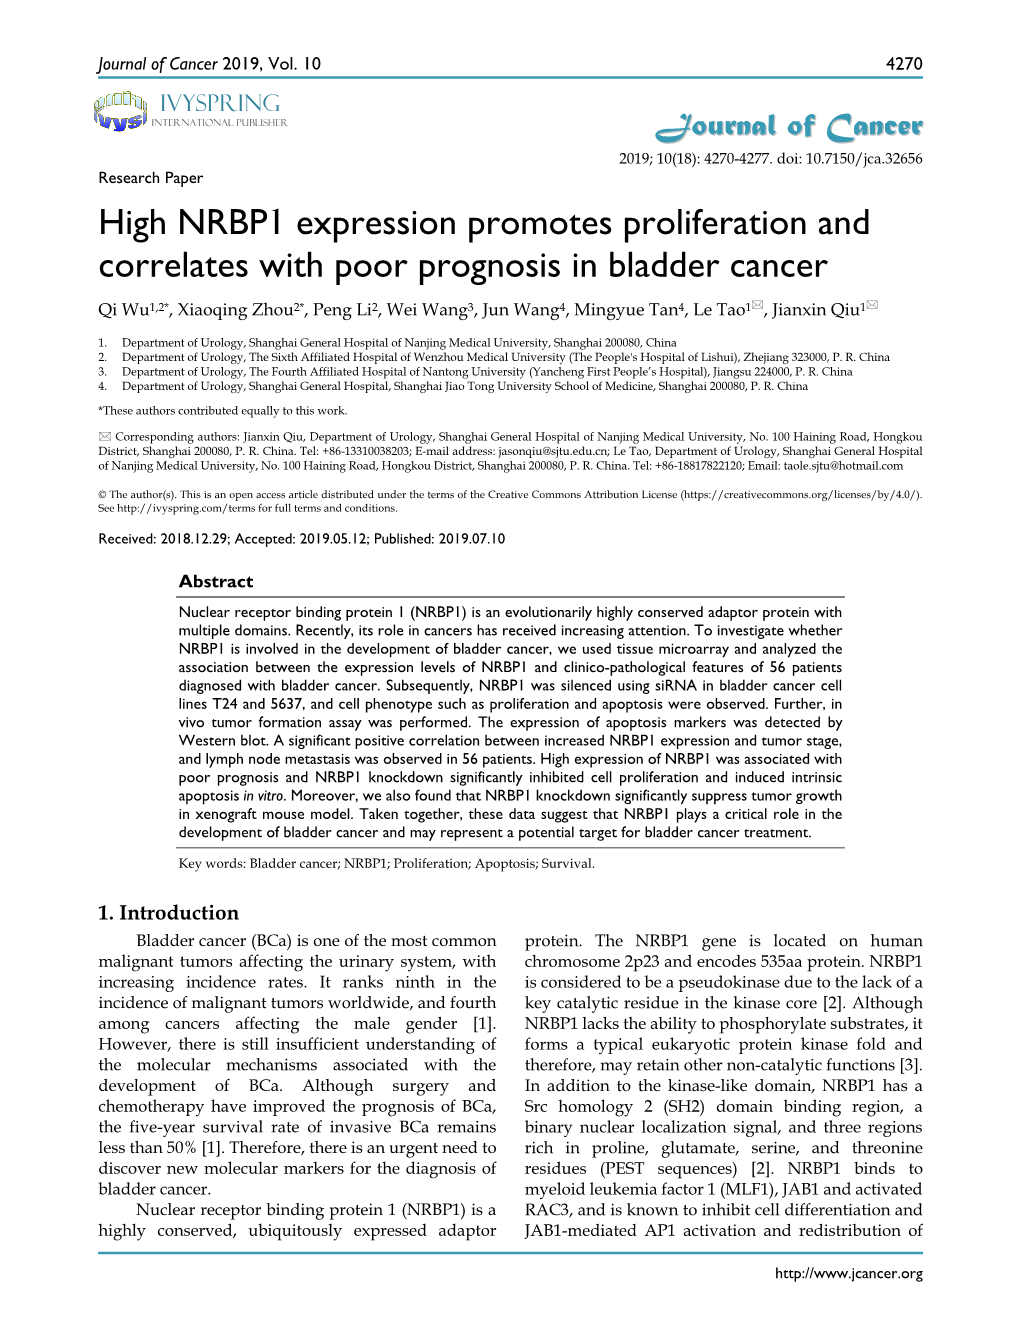 High NRBP1 Expression Promotes Proliferation and Correlates With